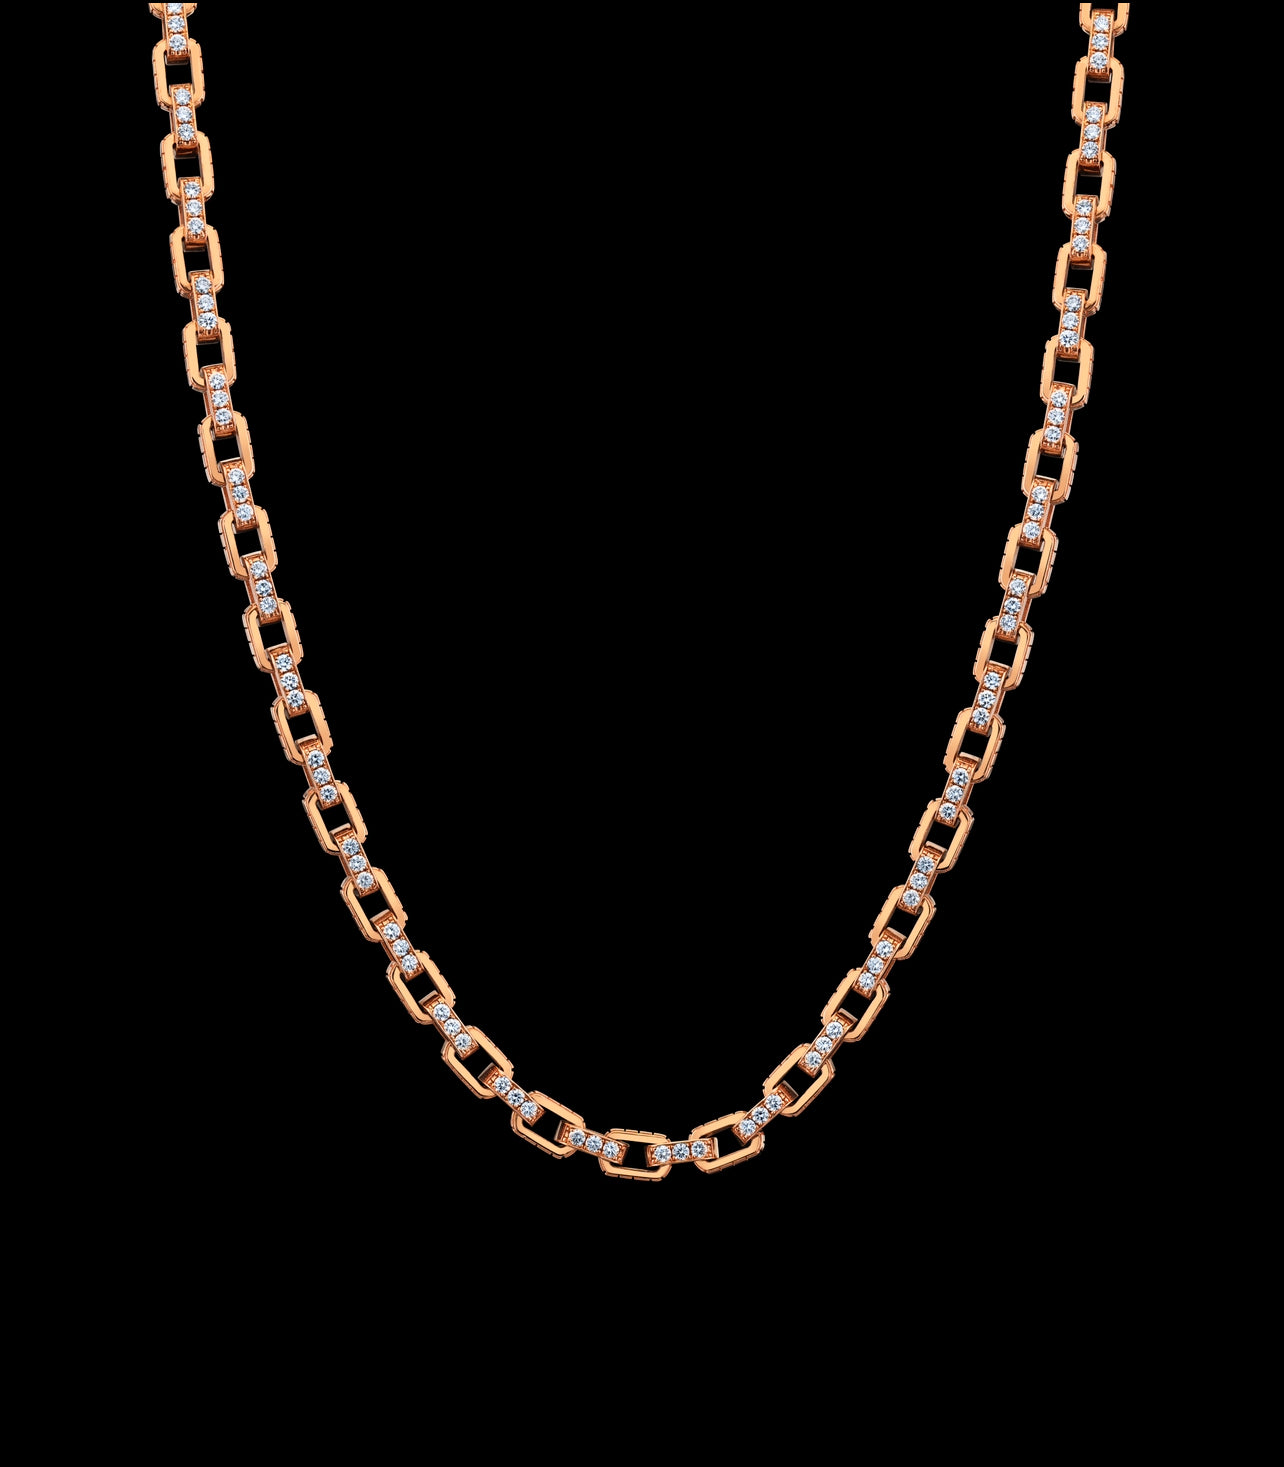 Signature Collection ‘XL’ Link Necklace with diamonds.